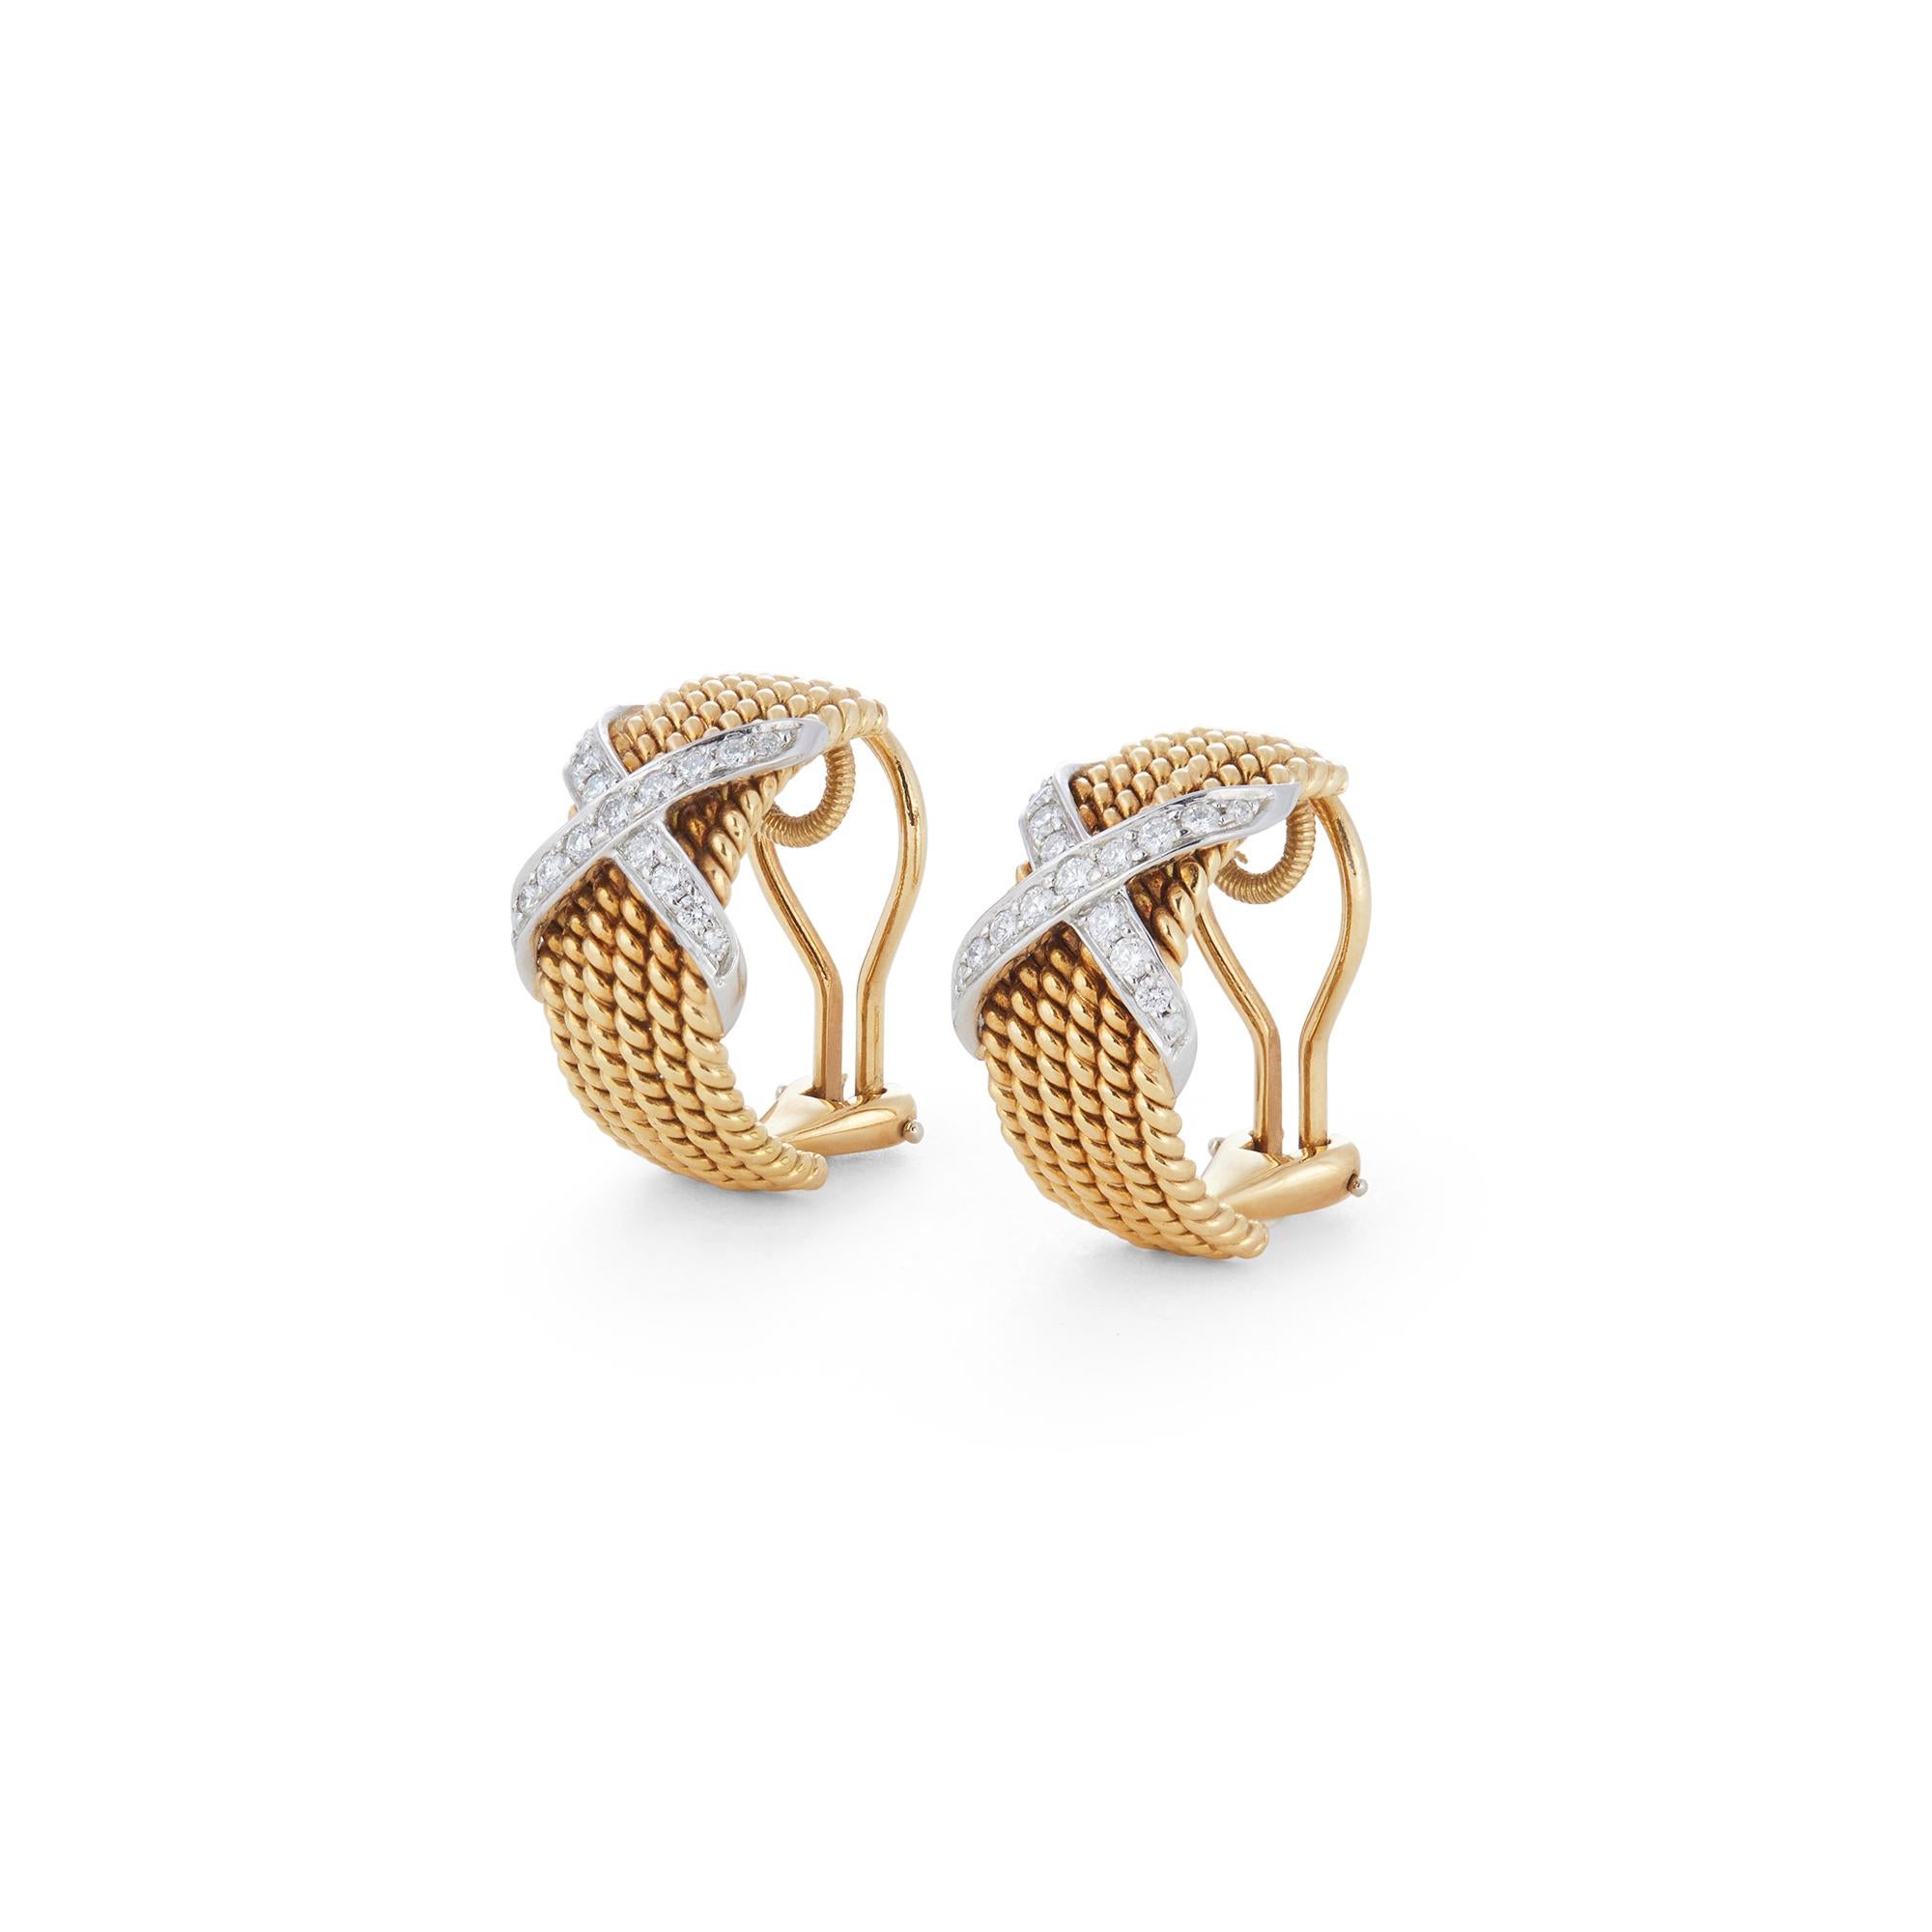 Authentic Jean Schlumberger for Tiffany & Co. ear clips designed as demi-hoops of roped 18 karat yellow gold surmounted by platinum 'X' accents set with 34 round brilliant cut diamonds (G-H, VS) weighing an estimated 0.50 carats total. The clips